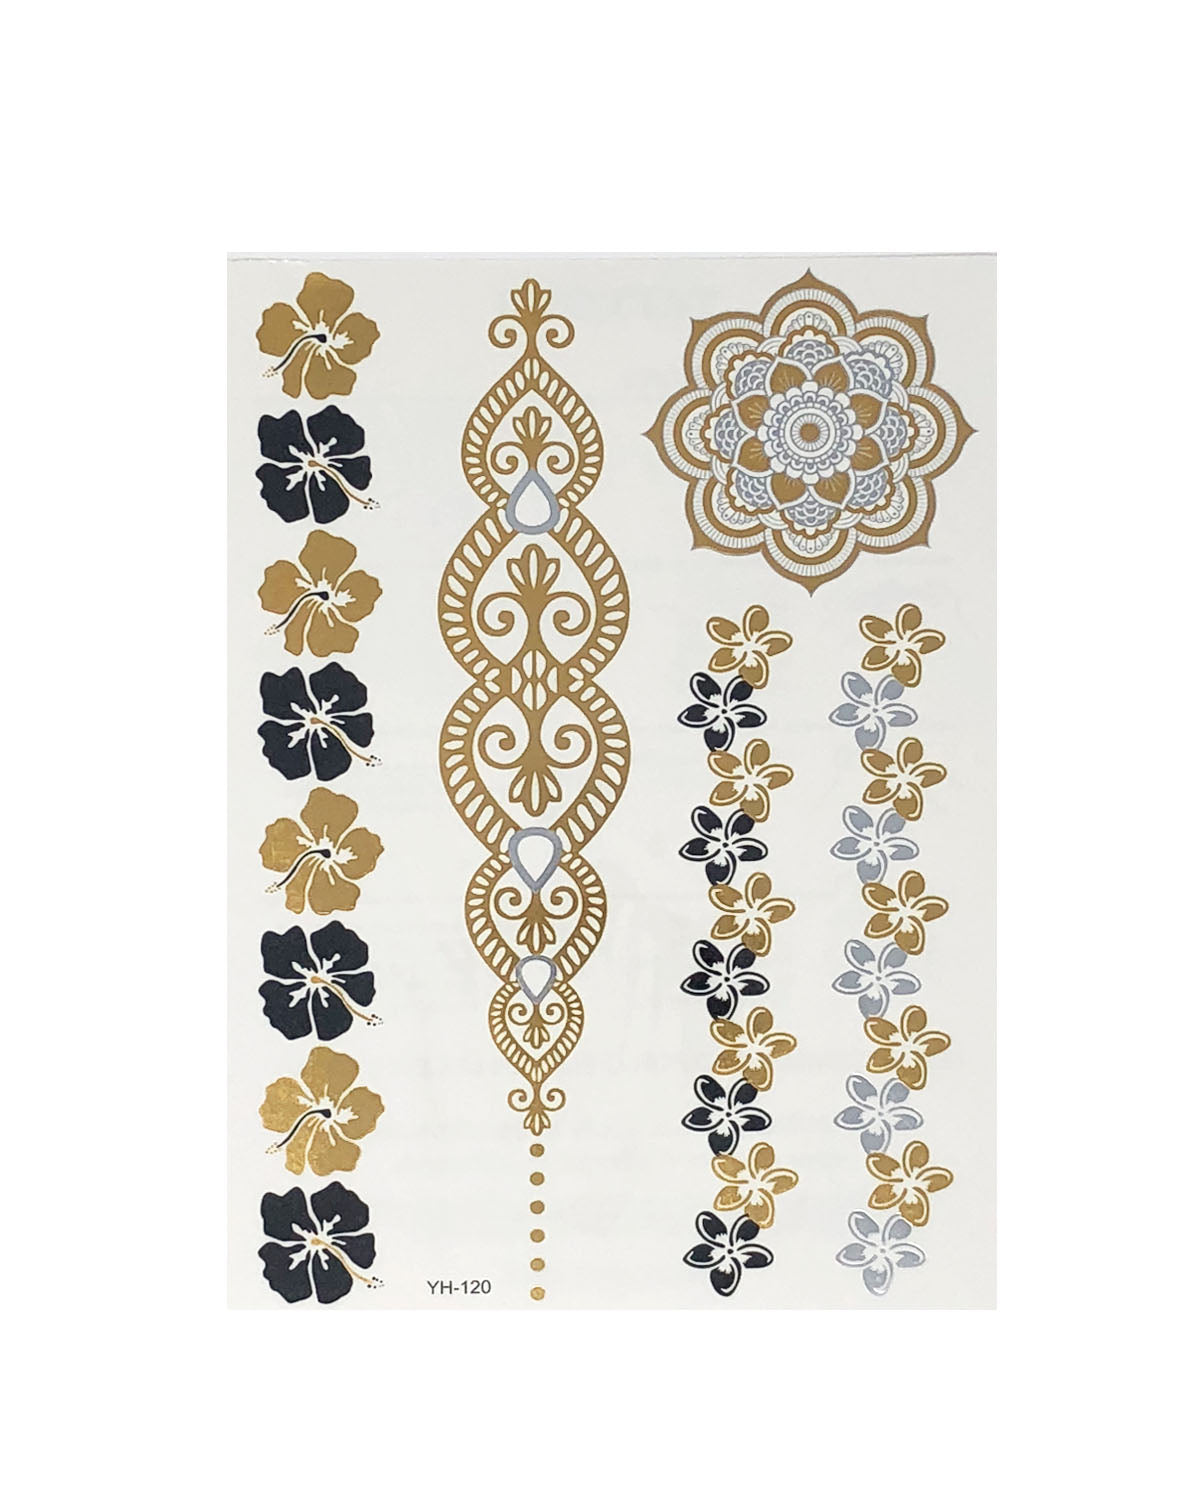 30% OFF on Saona Collection : Metallic Temporary Tattoos for Women Teens  Girls - 12 Sheets Gold Silver Temporary Tattoos Glitter Tattoo Designs  Jewelry Tattoos - 150+ Color Flash Fake Waterproof Tattoo